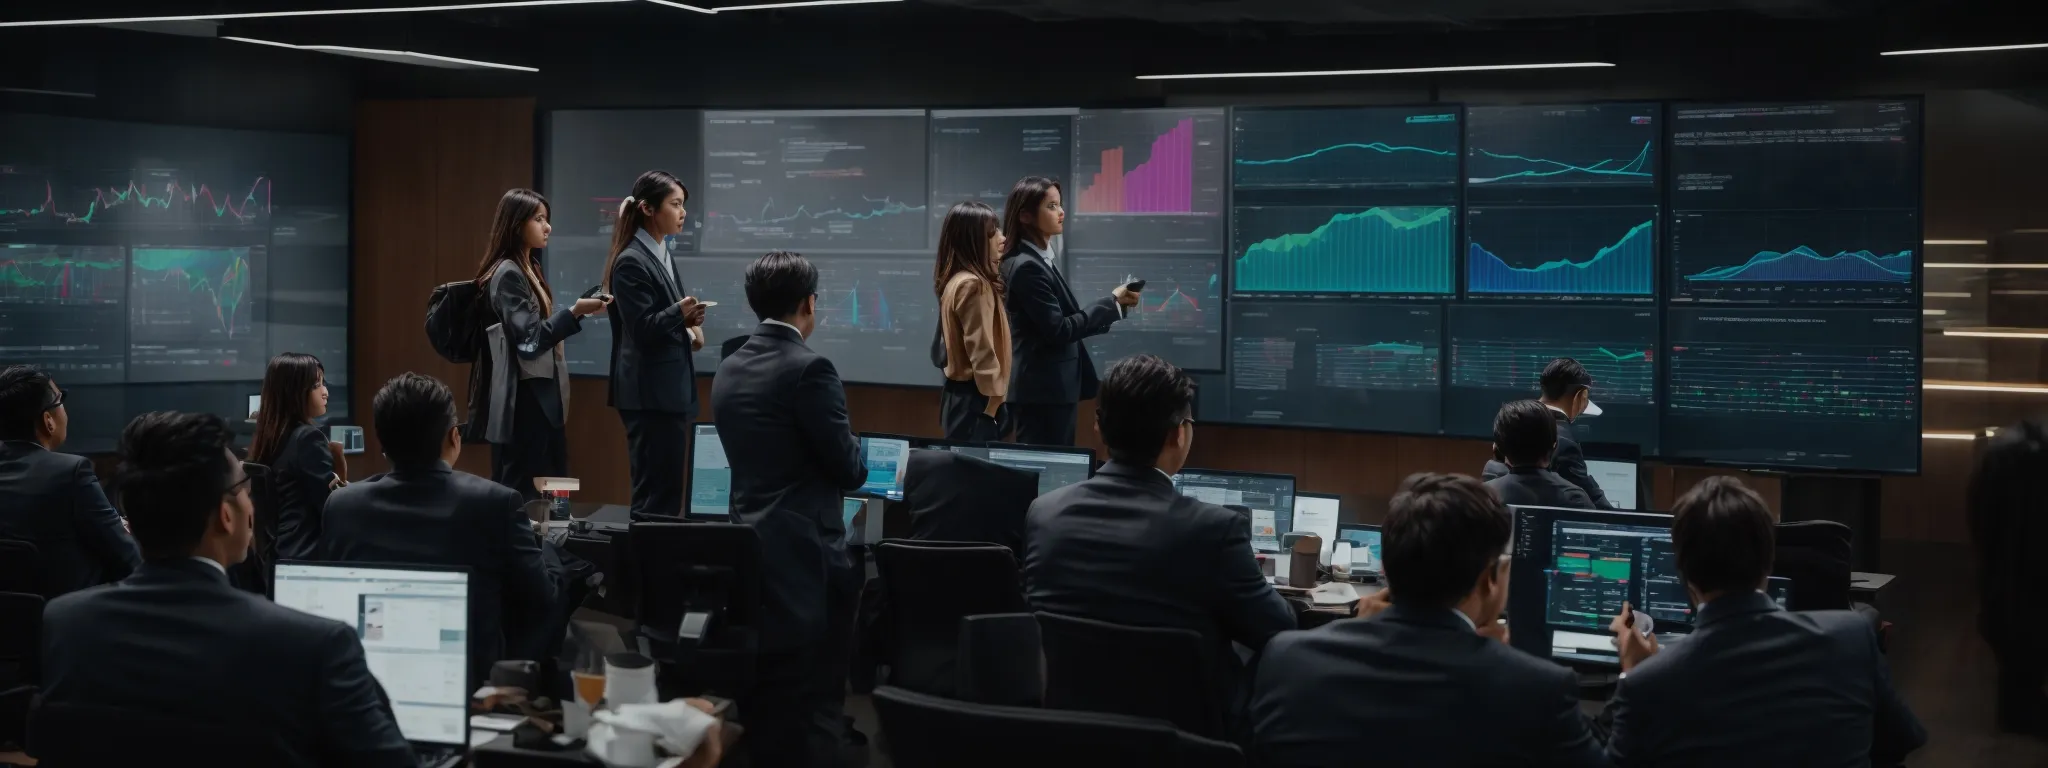 a team of professionals gathers around a large digital screen displaying colorful charts and timelines, actively engaged in a strategy session.